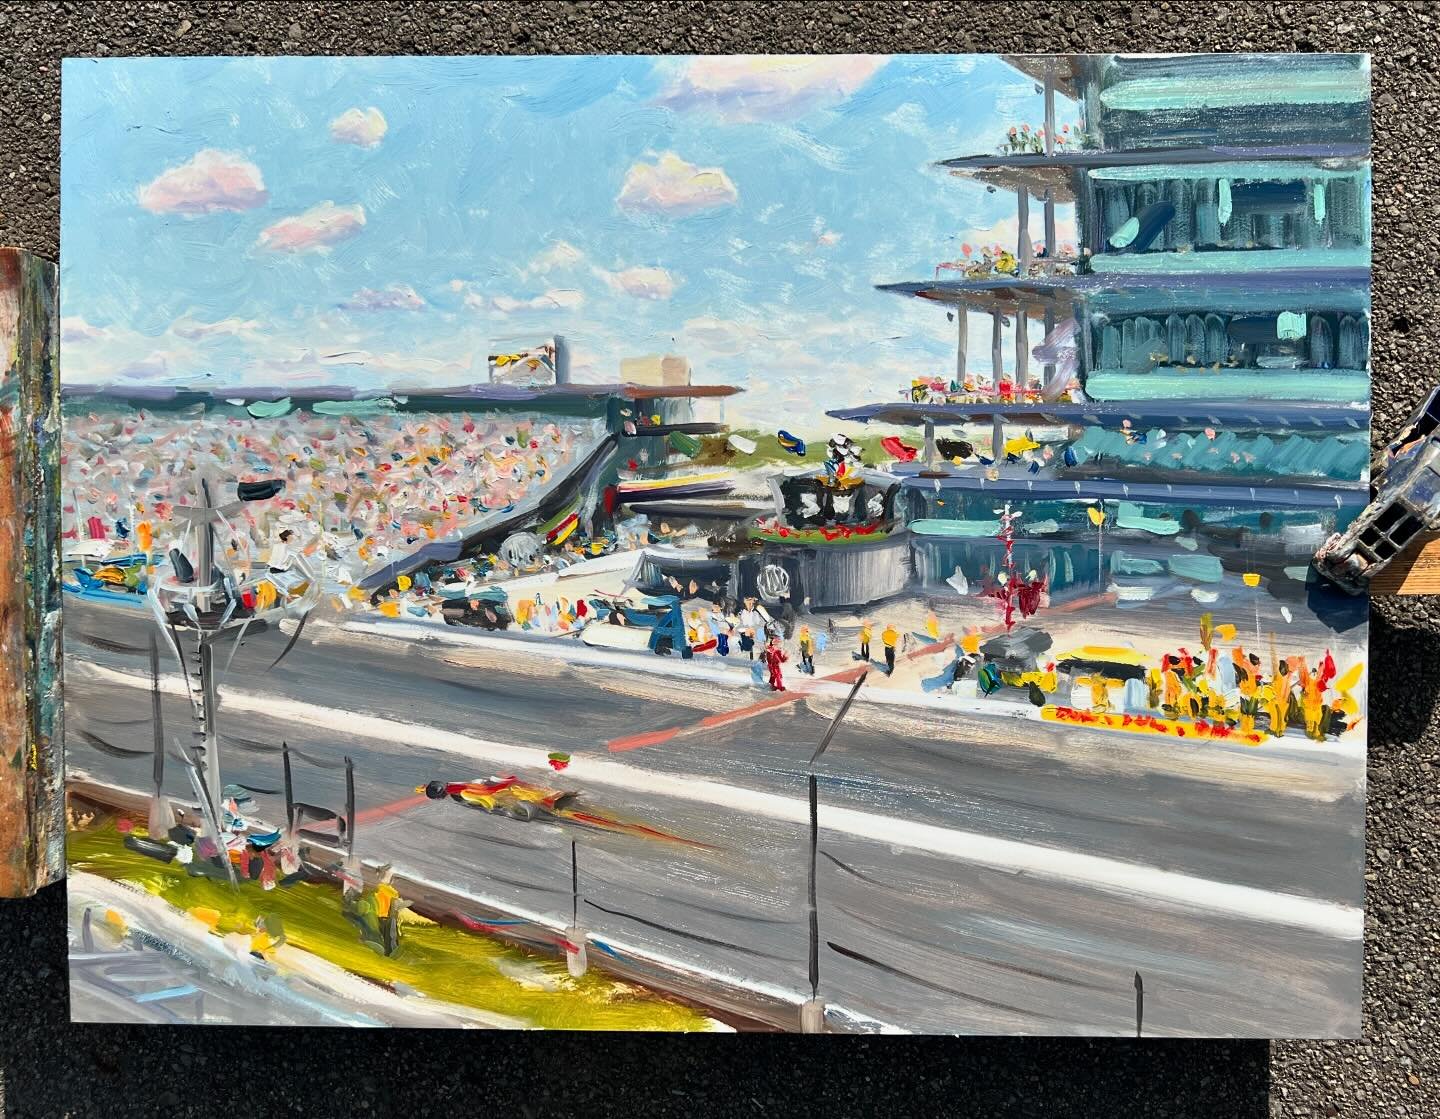 @alexpalou wins the 2024 Grand Prix at the @indianapolismotorspeedway!! 18x24&rdquo; oil on #gessobord #indycar #rembrandtoils #royaltalensna #royalbrushart #indianapolismotorspeedway #thisismay